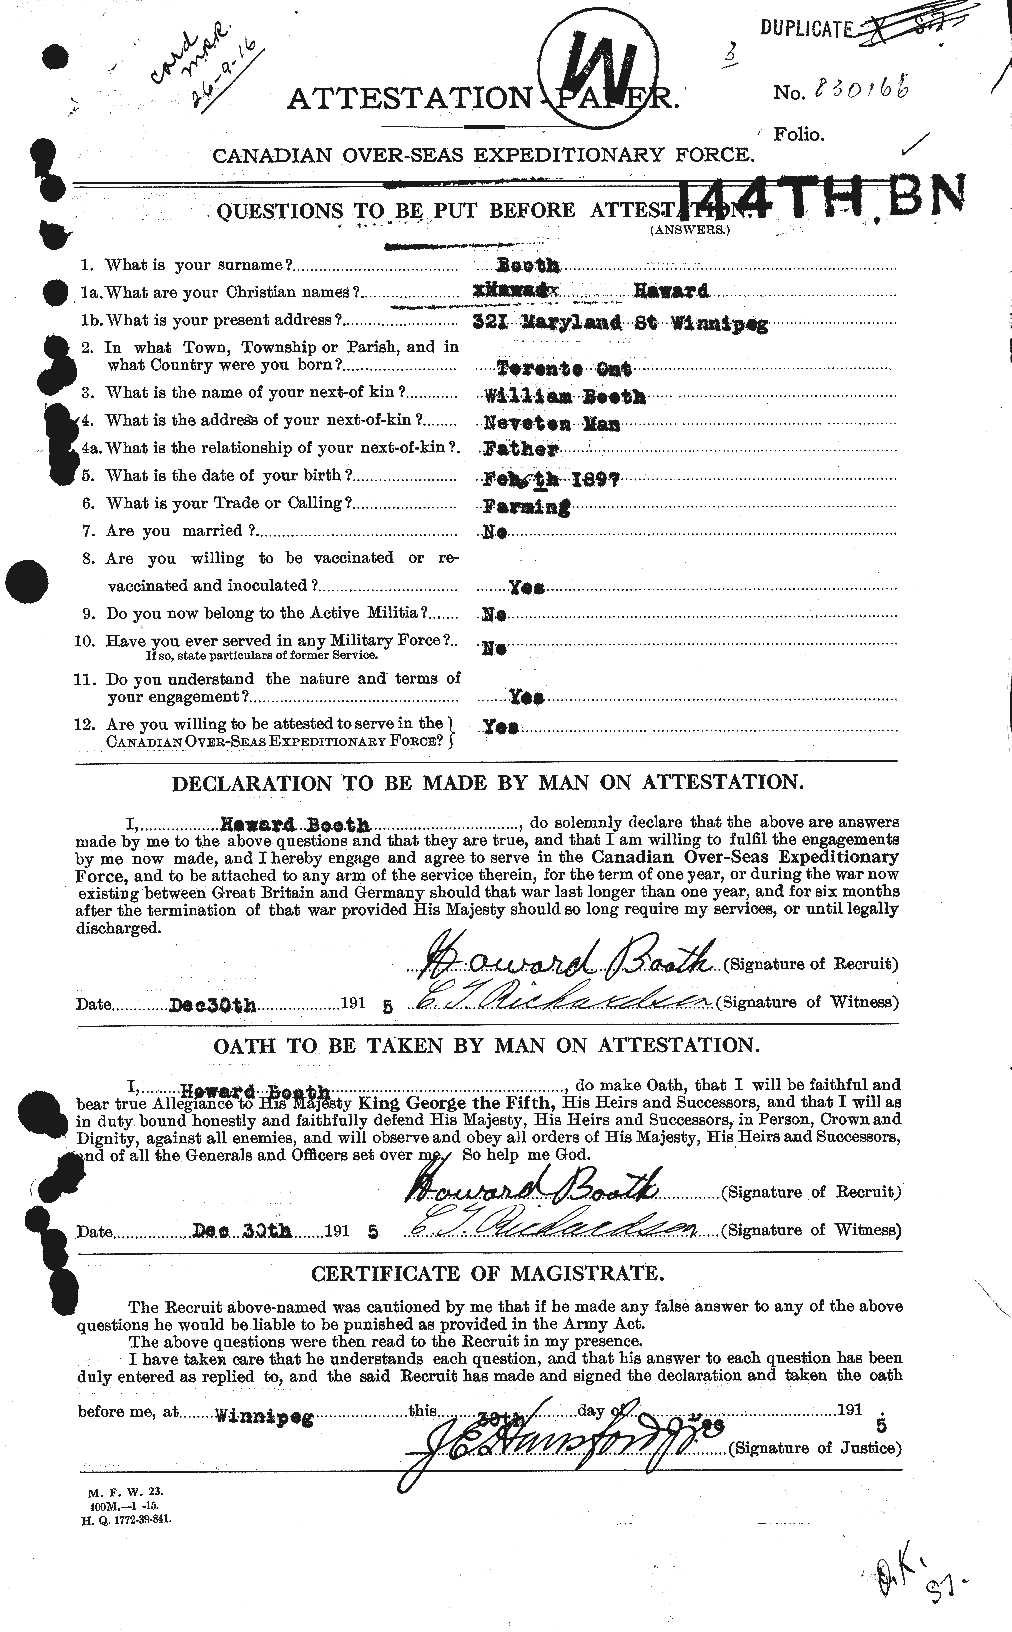 Personnel Records of the First World War - CEF 250894a